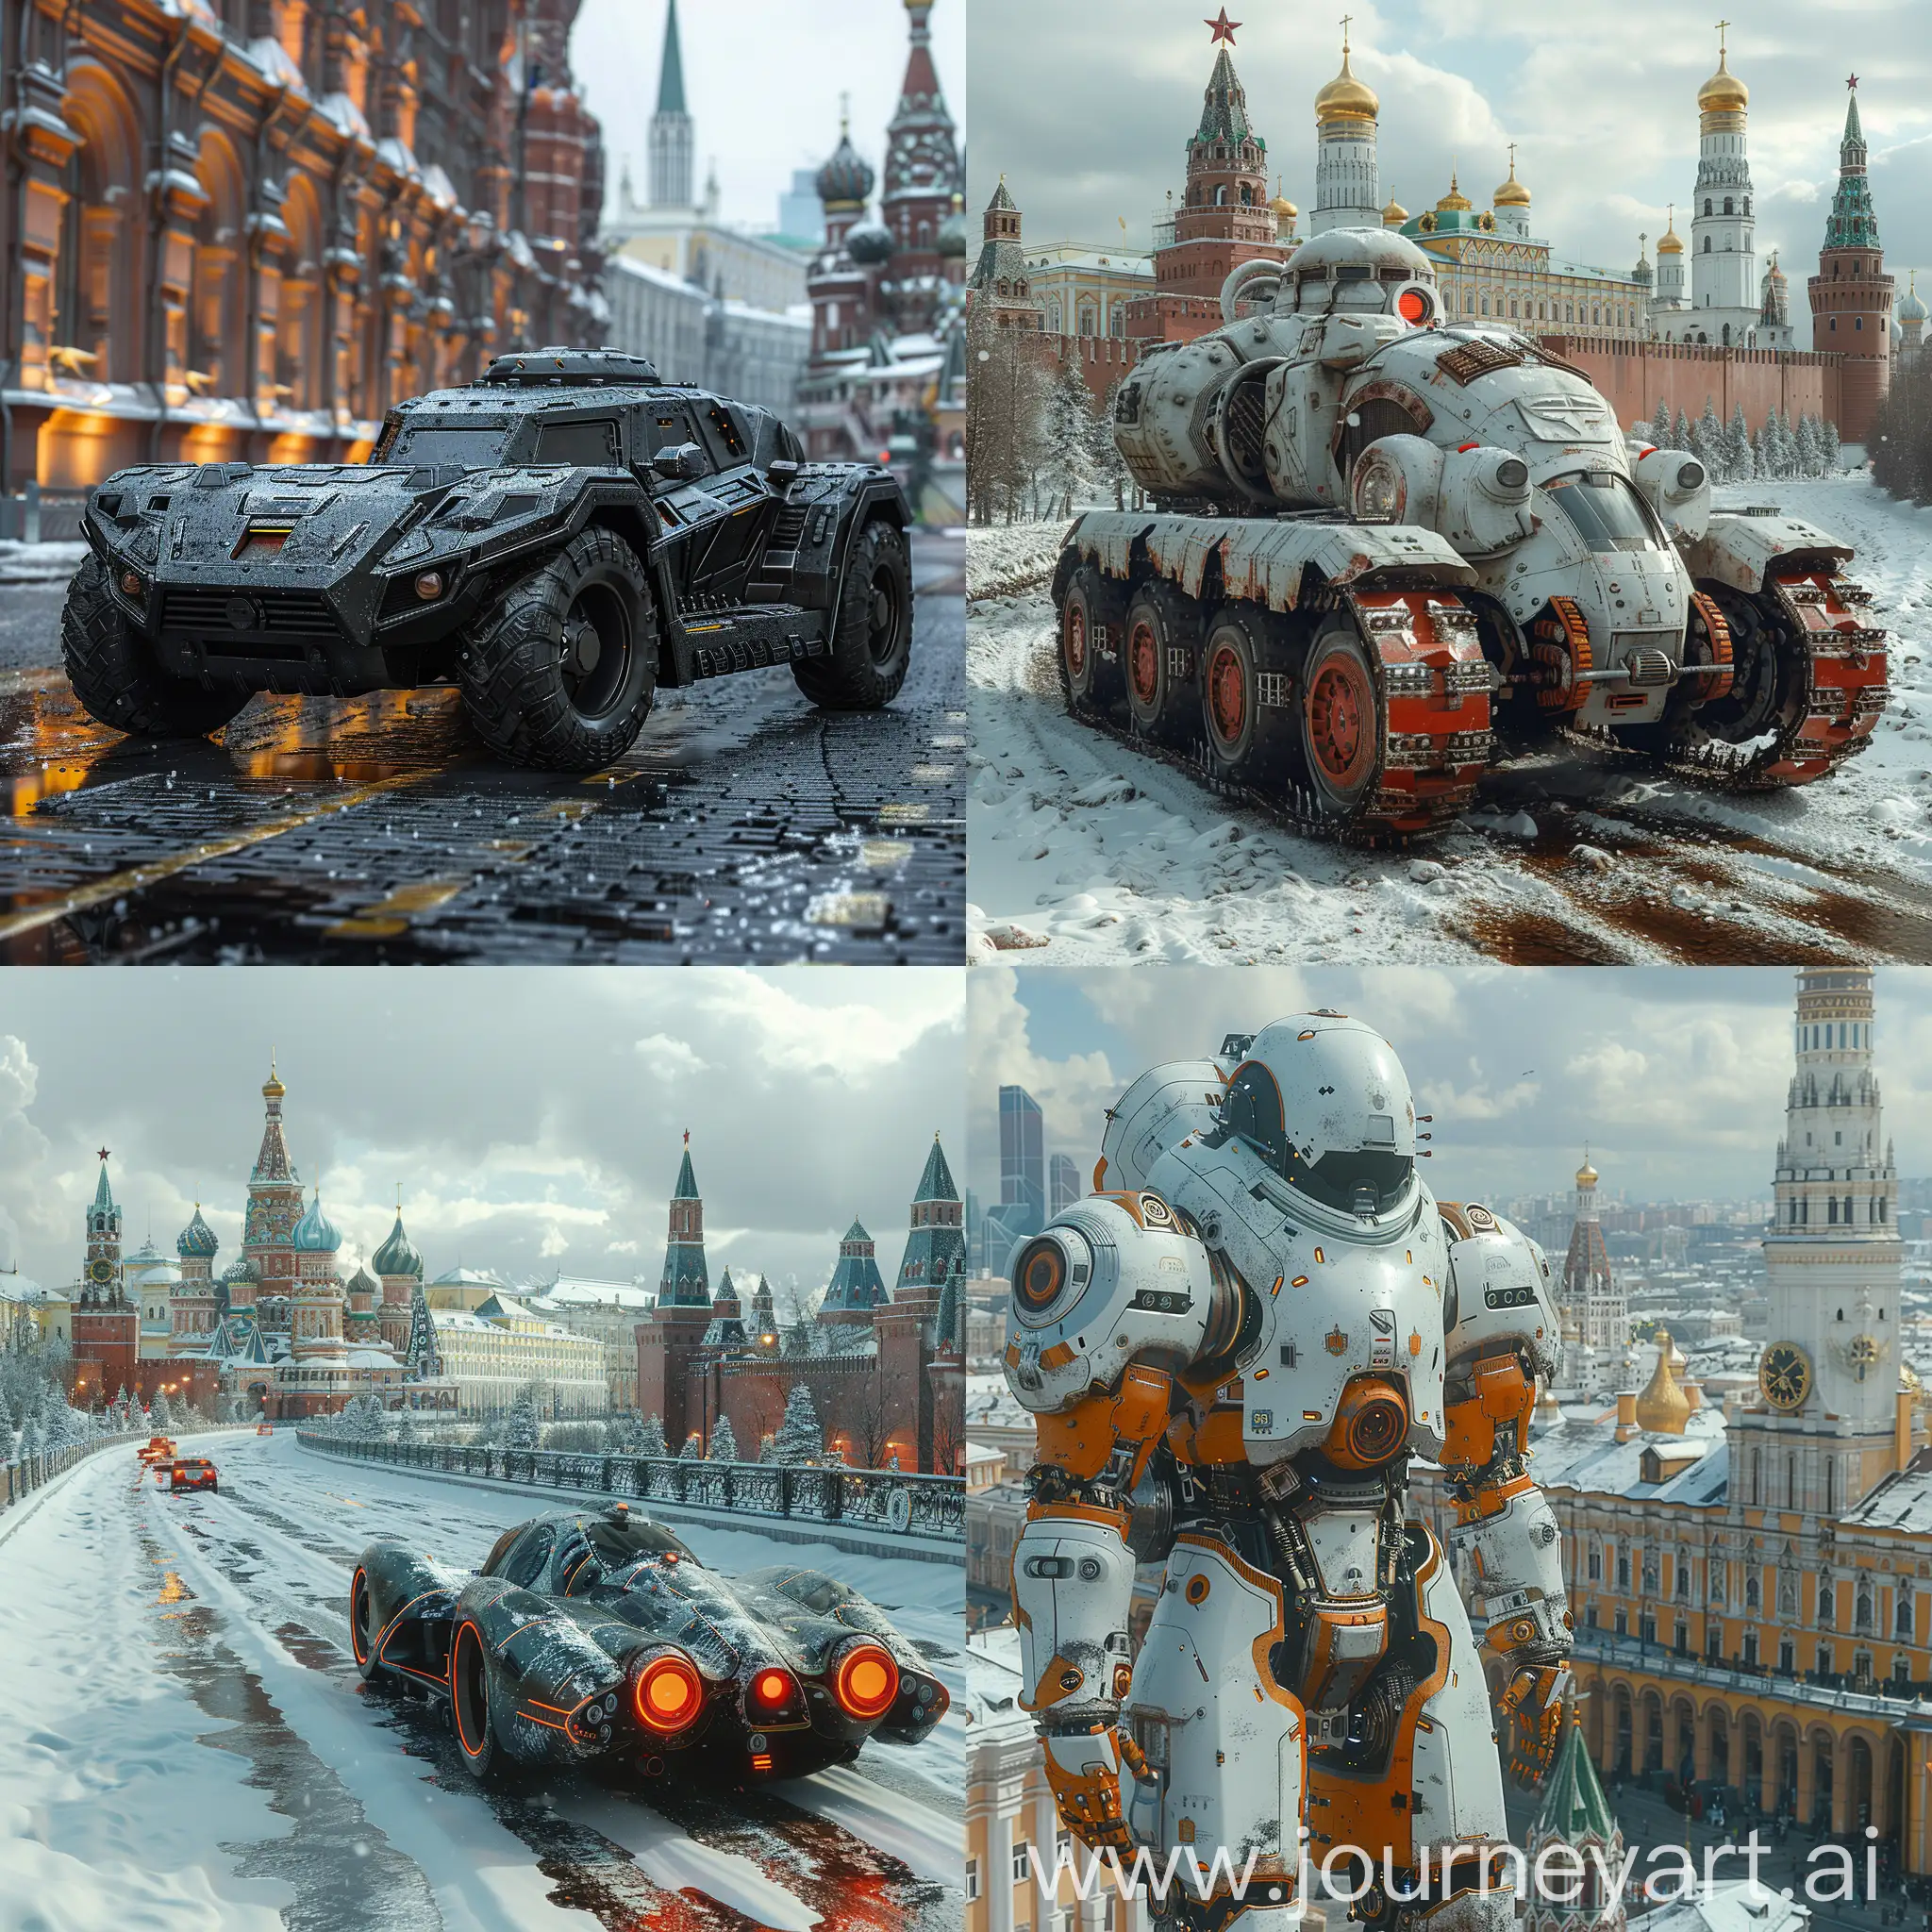 Futuristic-Armored-Moscow-Cityscape-in-HighTech-Style